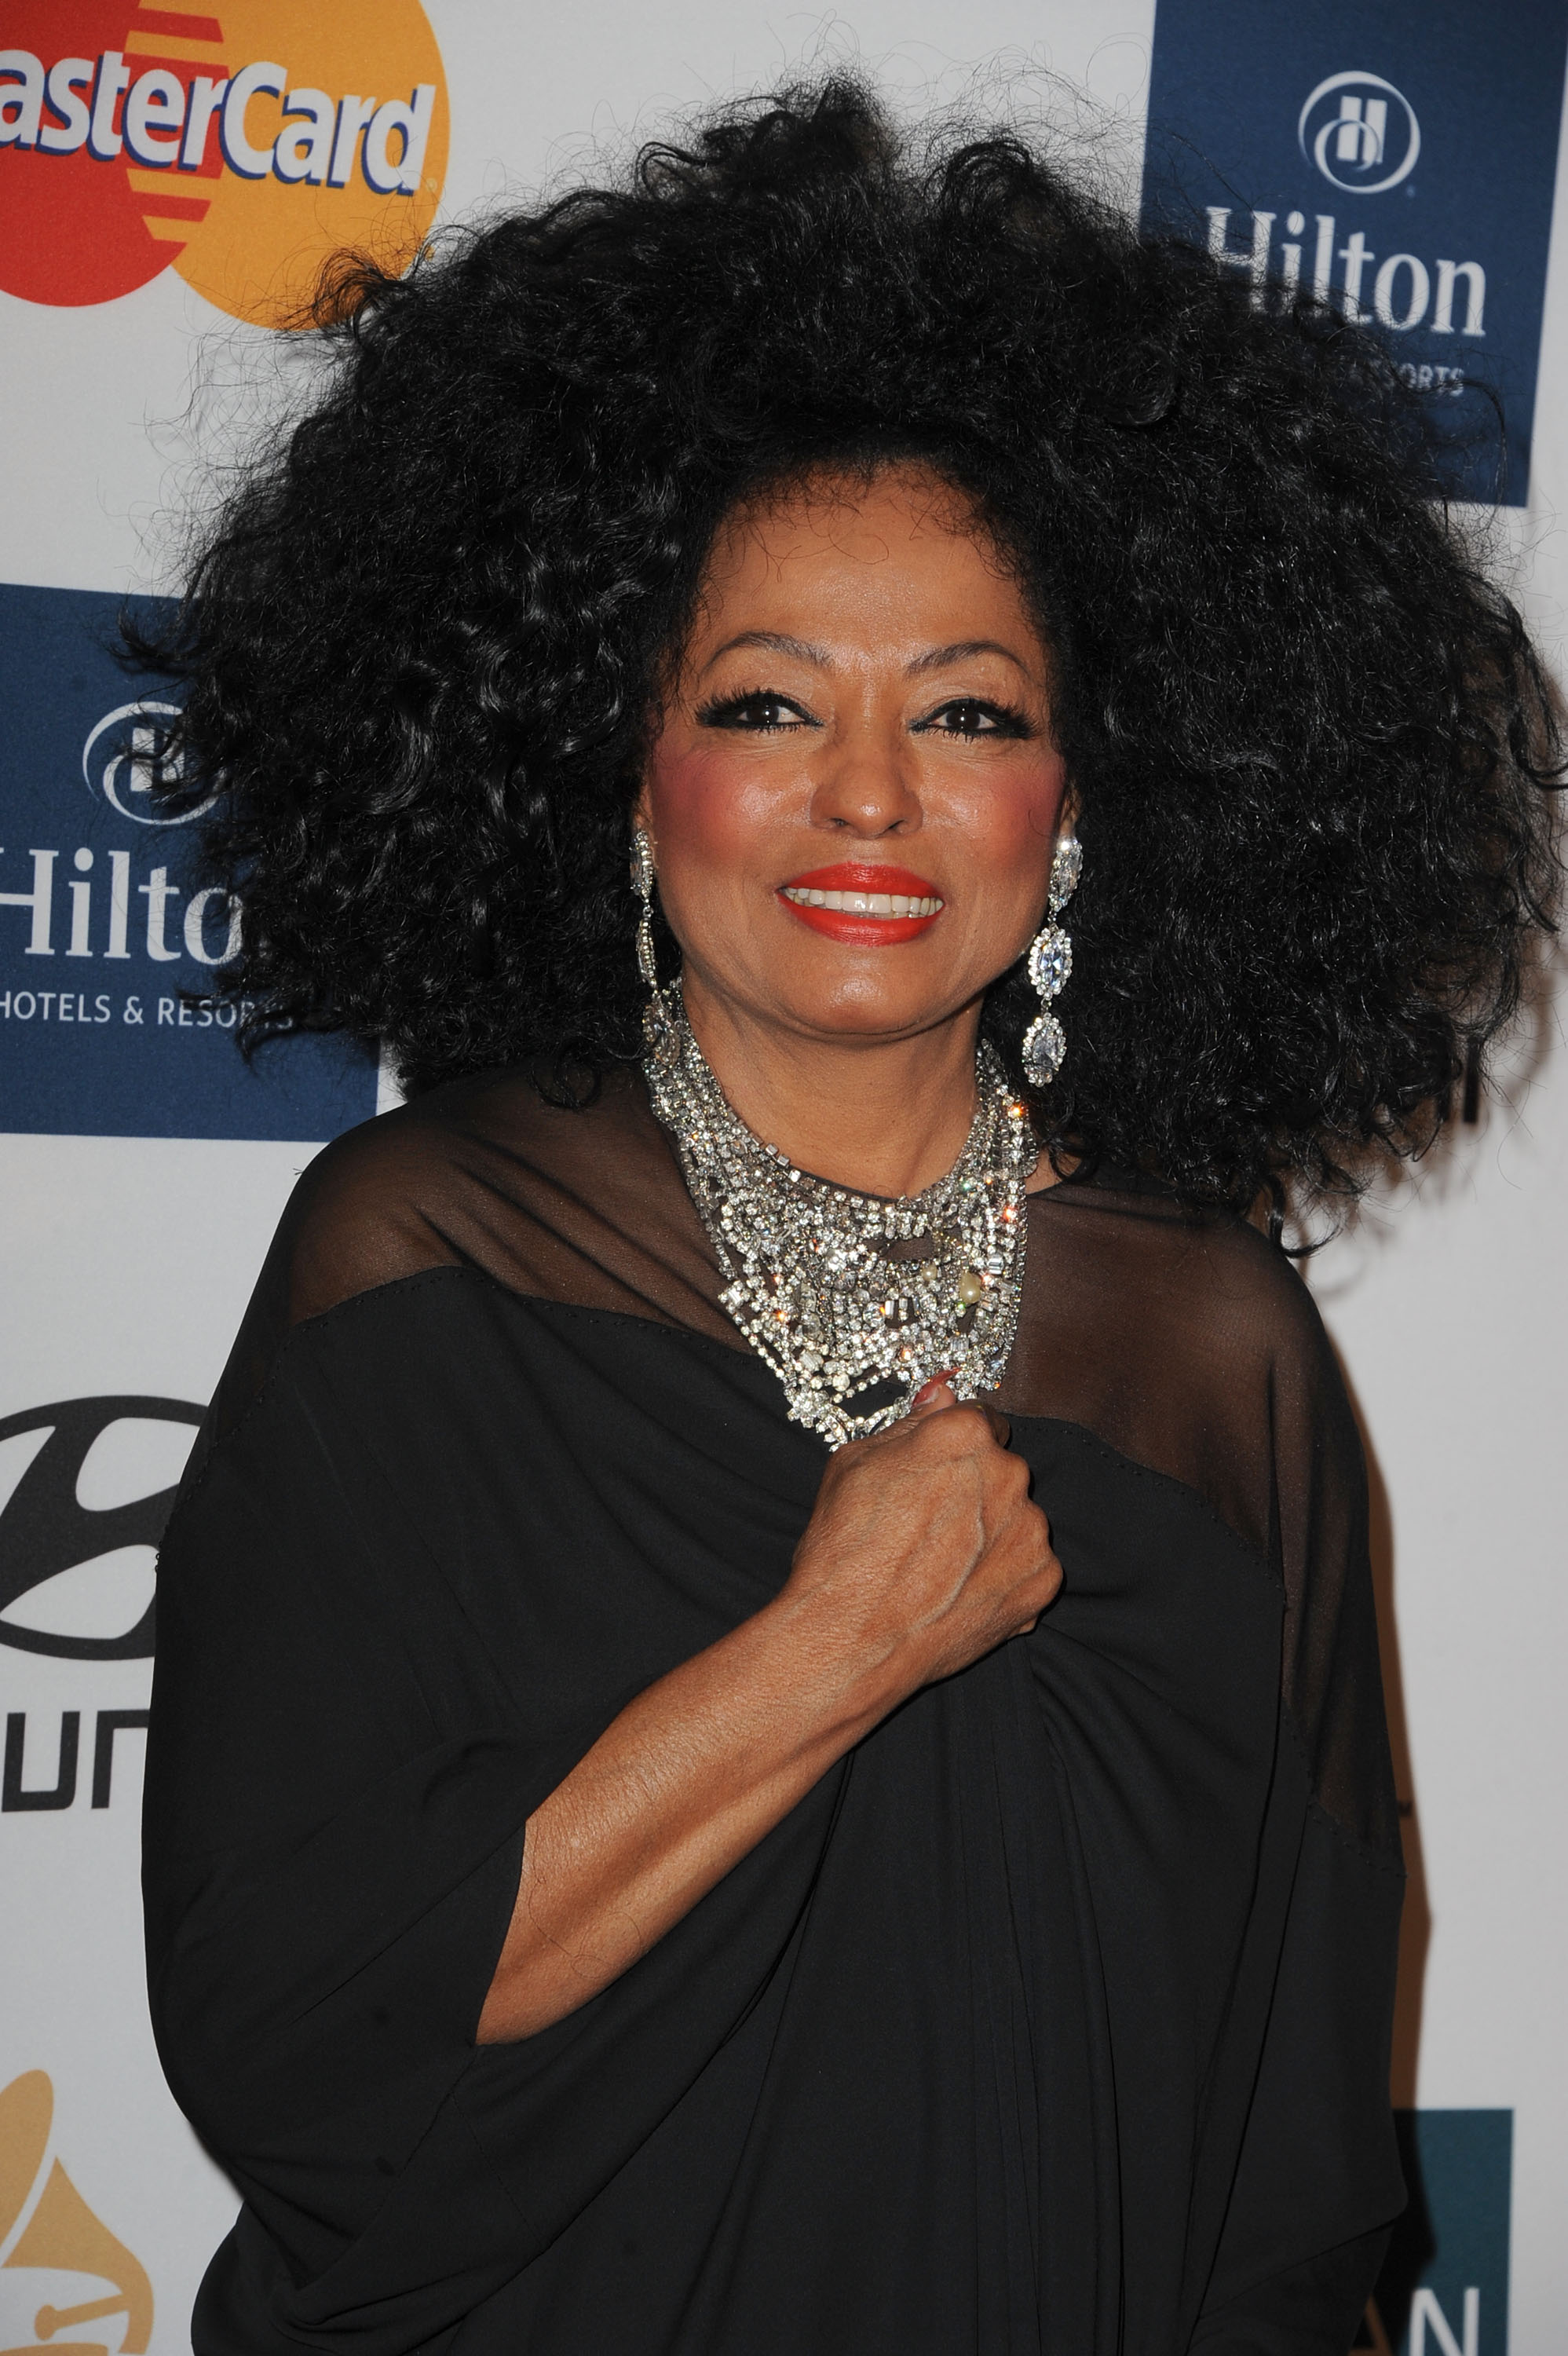 Diana Ross at Clive Davis and The Recording Academy's Pre-Grammy Gala and Salute to Industry Icons Honoring Richard Branson on February 11, 2012, in Beverly Hills, California | Source: Getty Images